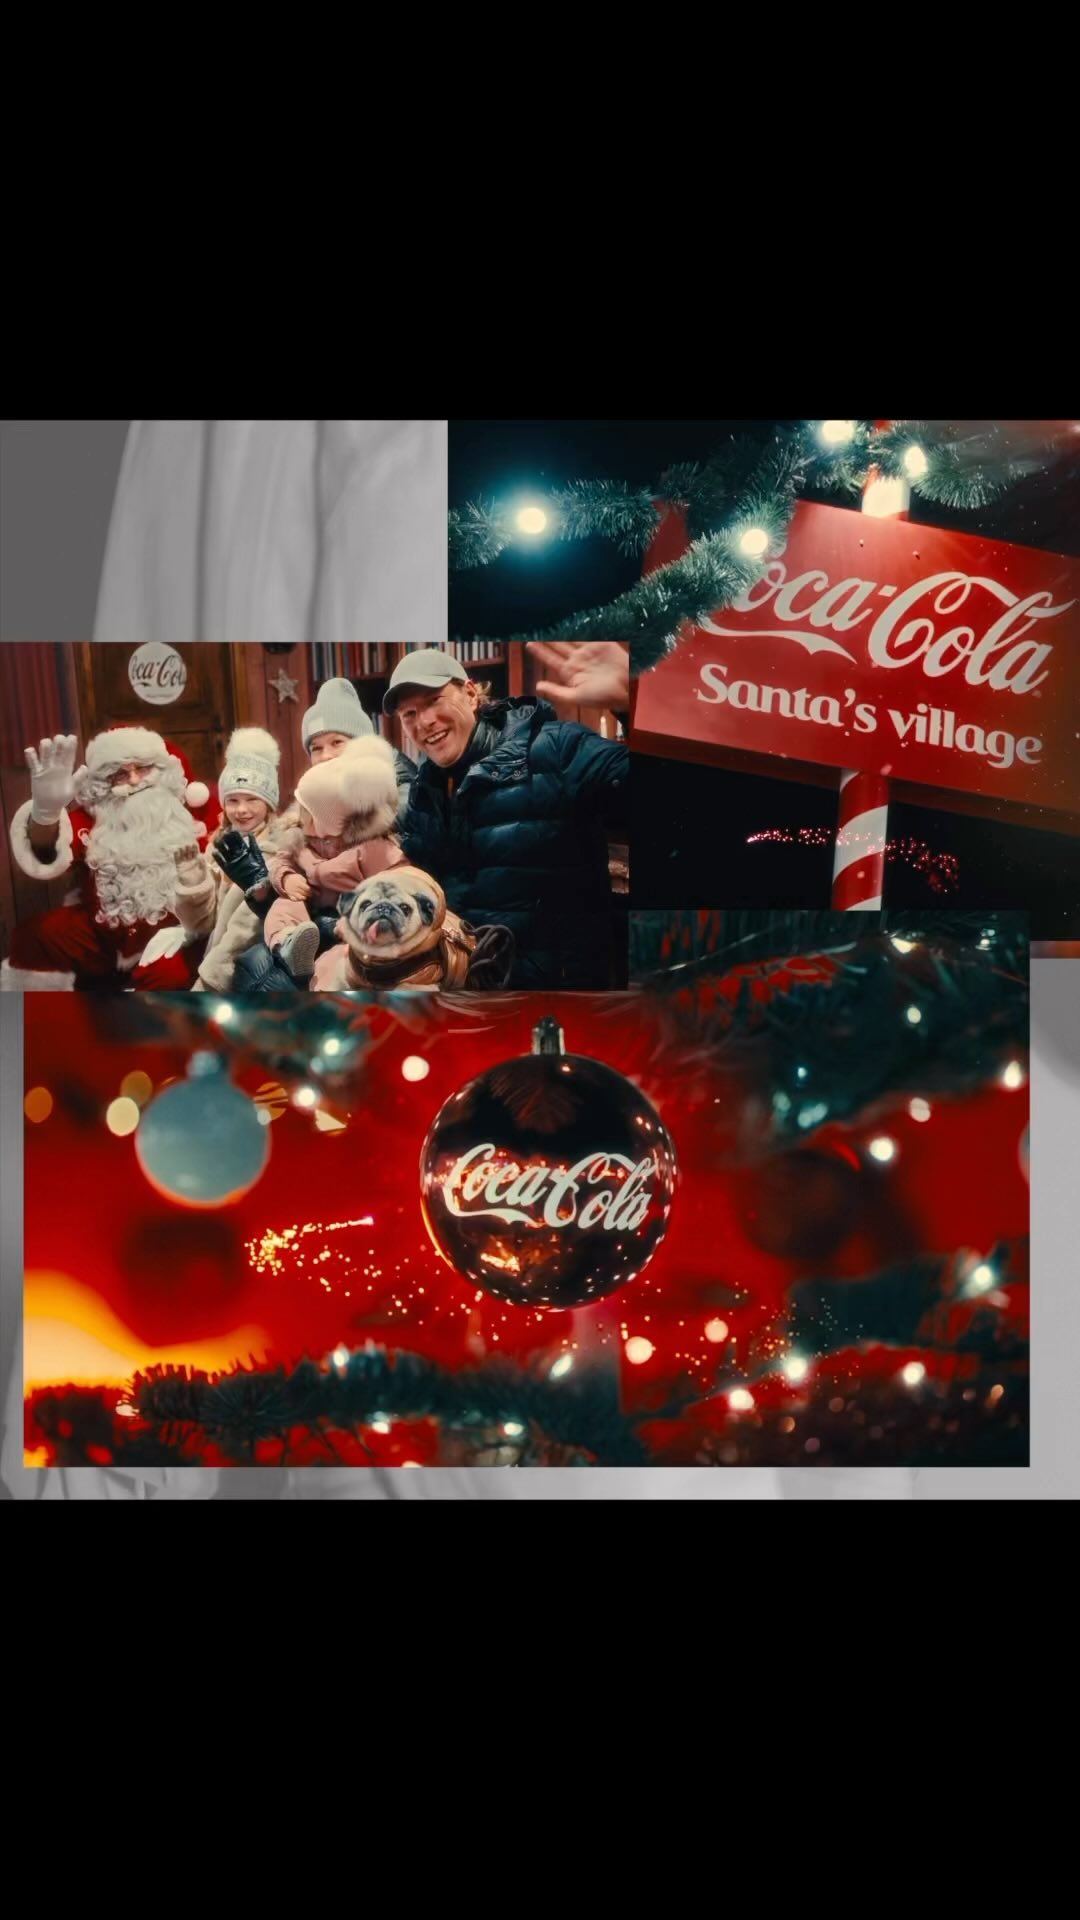 latest work.

This year, @outofoffice.agency designed the Santa Village with the North Pole pole as the center around the @cocacola_ch Christmas Truck.

With the Real Magic Tour, over 100,000 visitors were able to experience the magic of Christmas at 23 stops throughout Switzerland.

we captured a few moments.

we wish you and your family a merry christmas.

Director: Ian Tila
D.O.P: @gbvideography & Ian Tila
Edit & VFX: Ian Tila
Color Grading: @yar.color